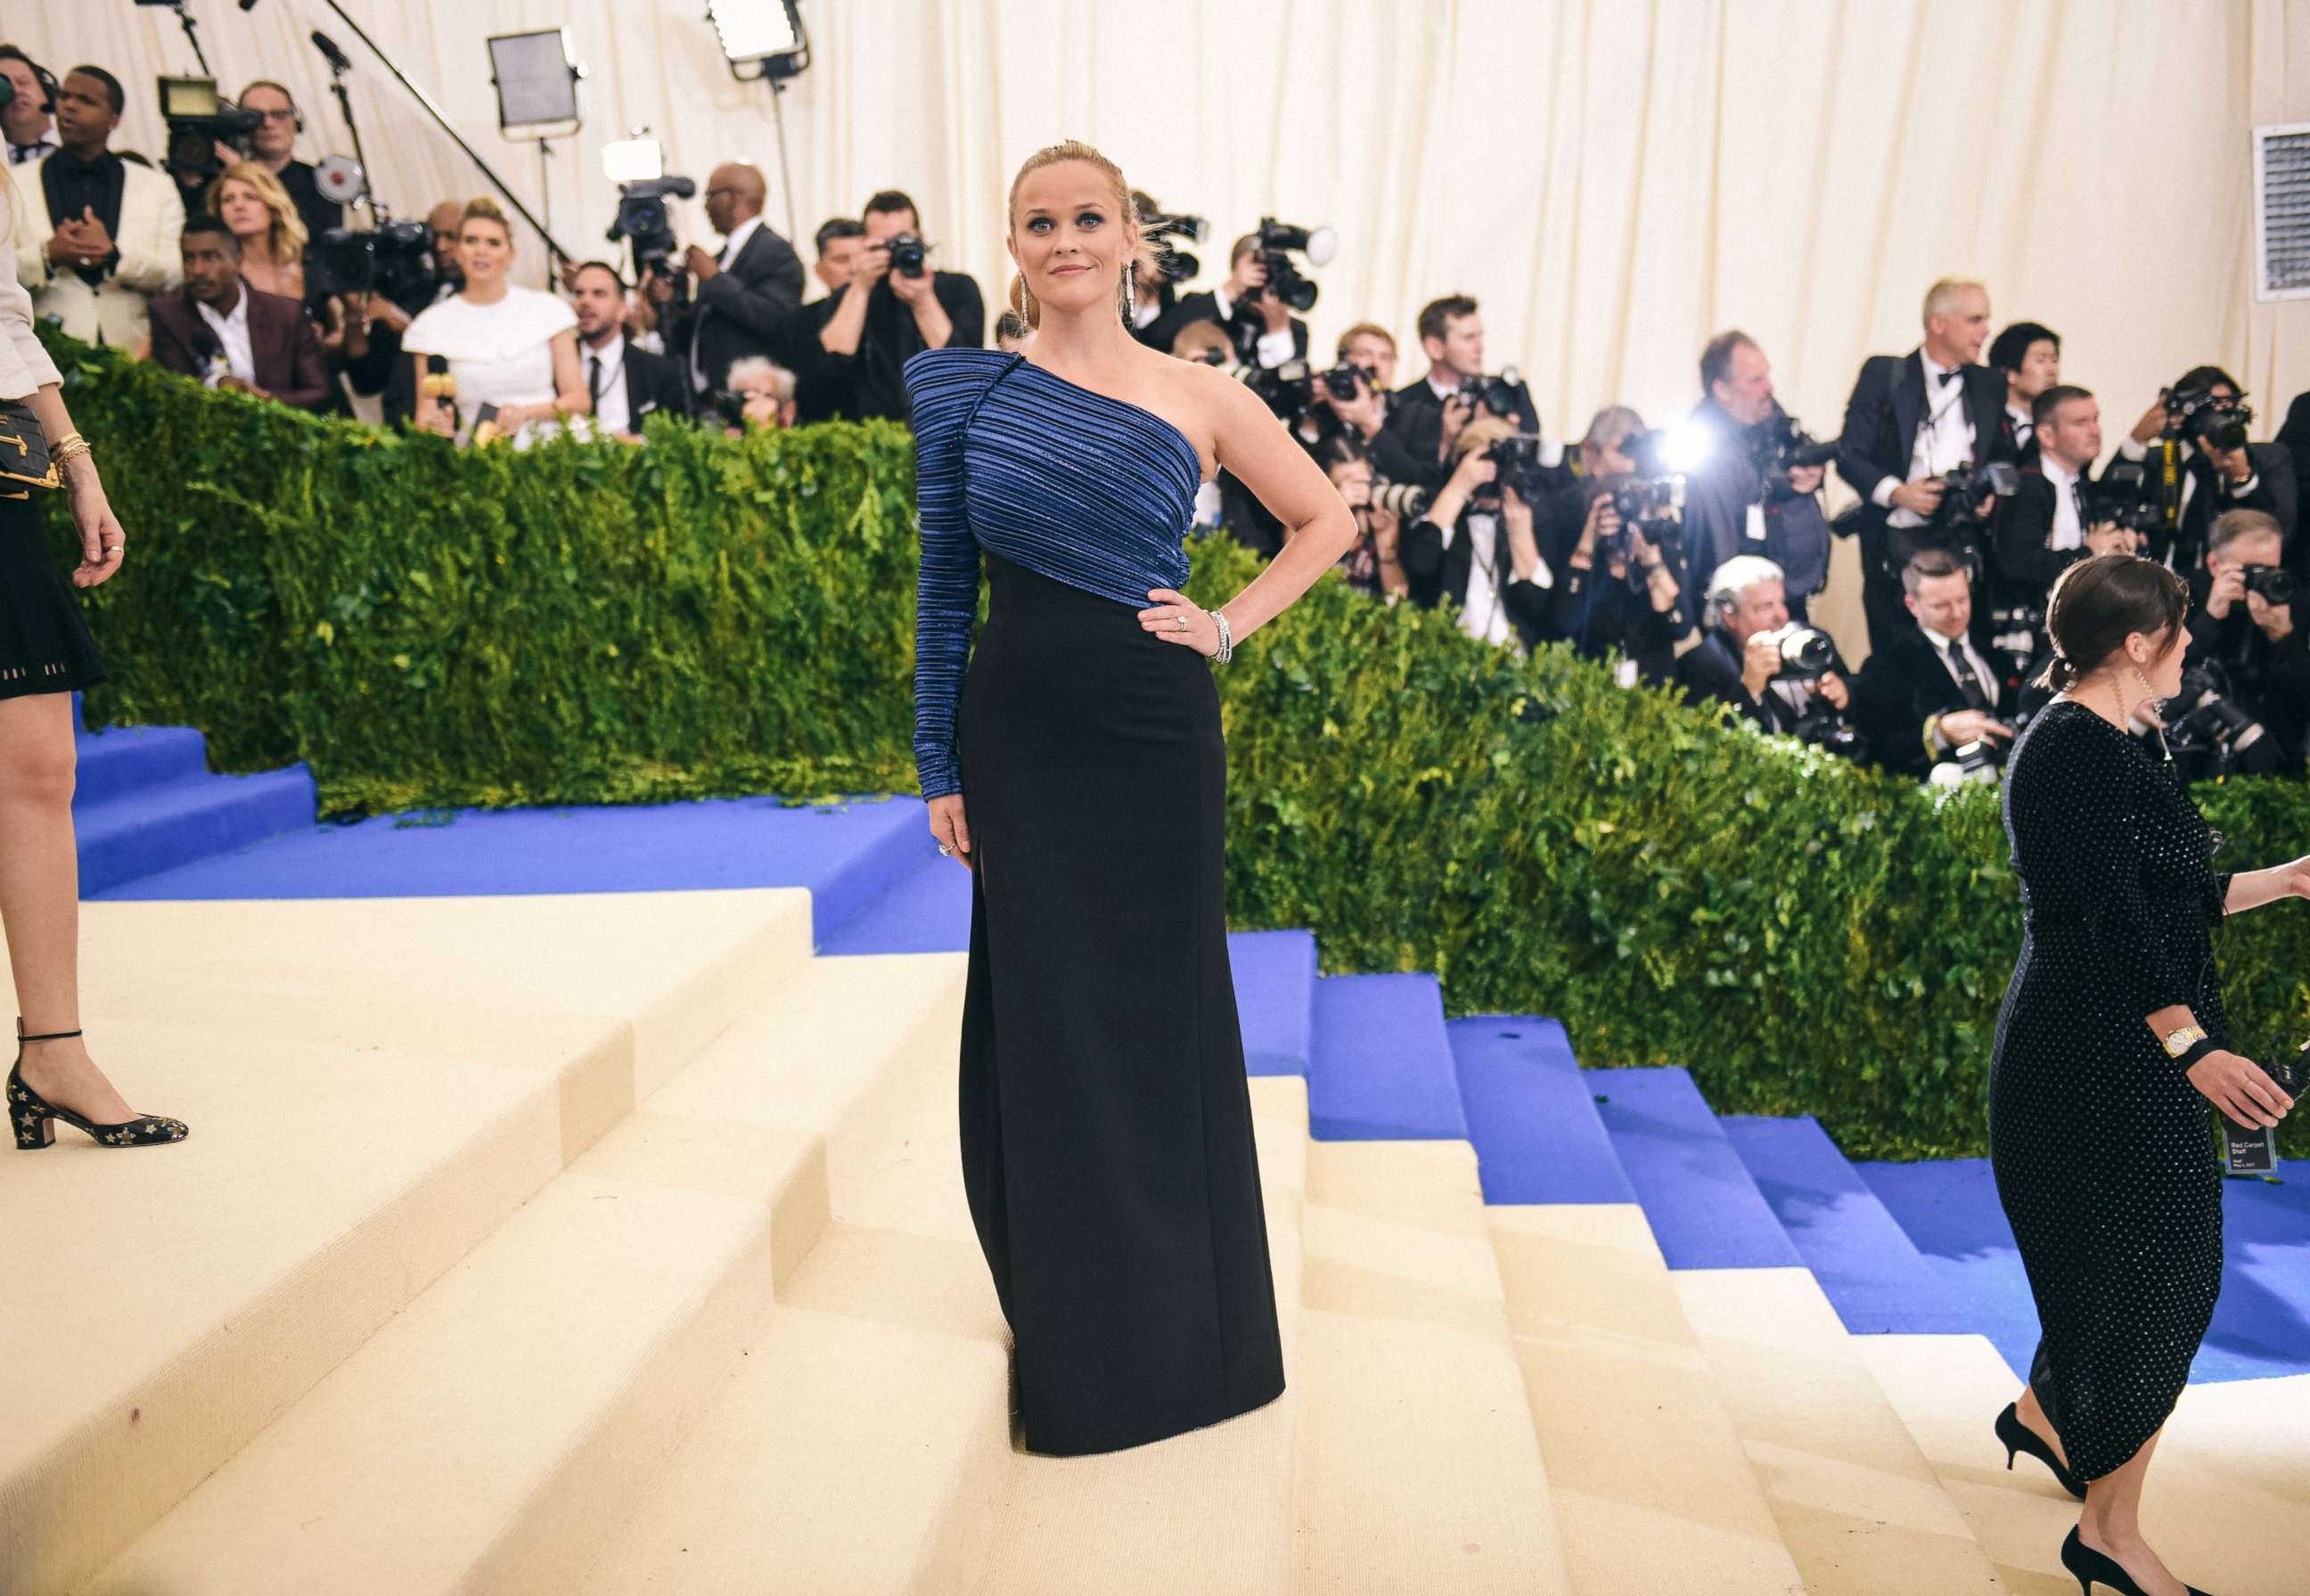 PHOTO: In this file photo, Reese Witherspoon attends the "Rei Kawakubo/Comme des Garcons: Art Of The In-Between" Costume Institute Gala at Metropolitan Museum of Art, May 1, 2017, in New York City.